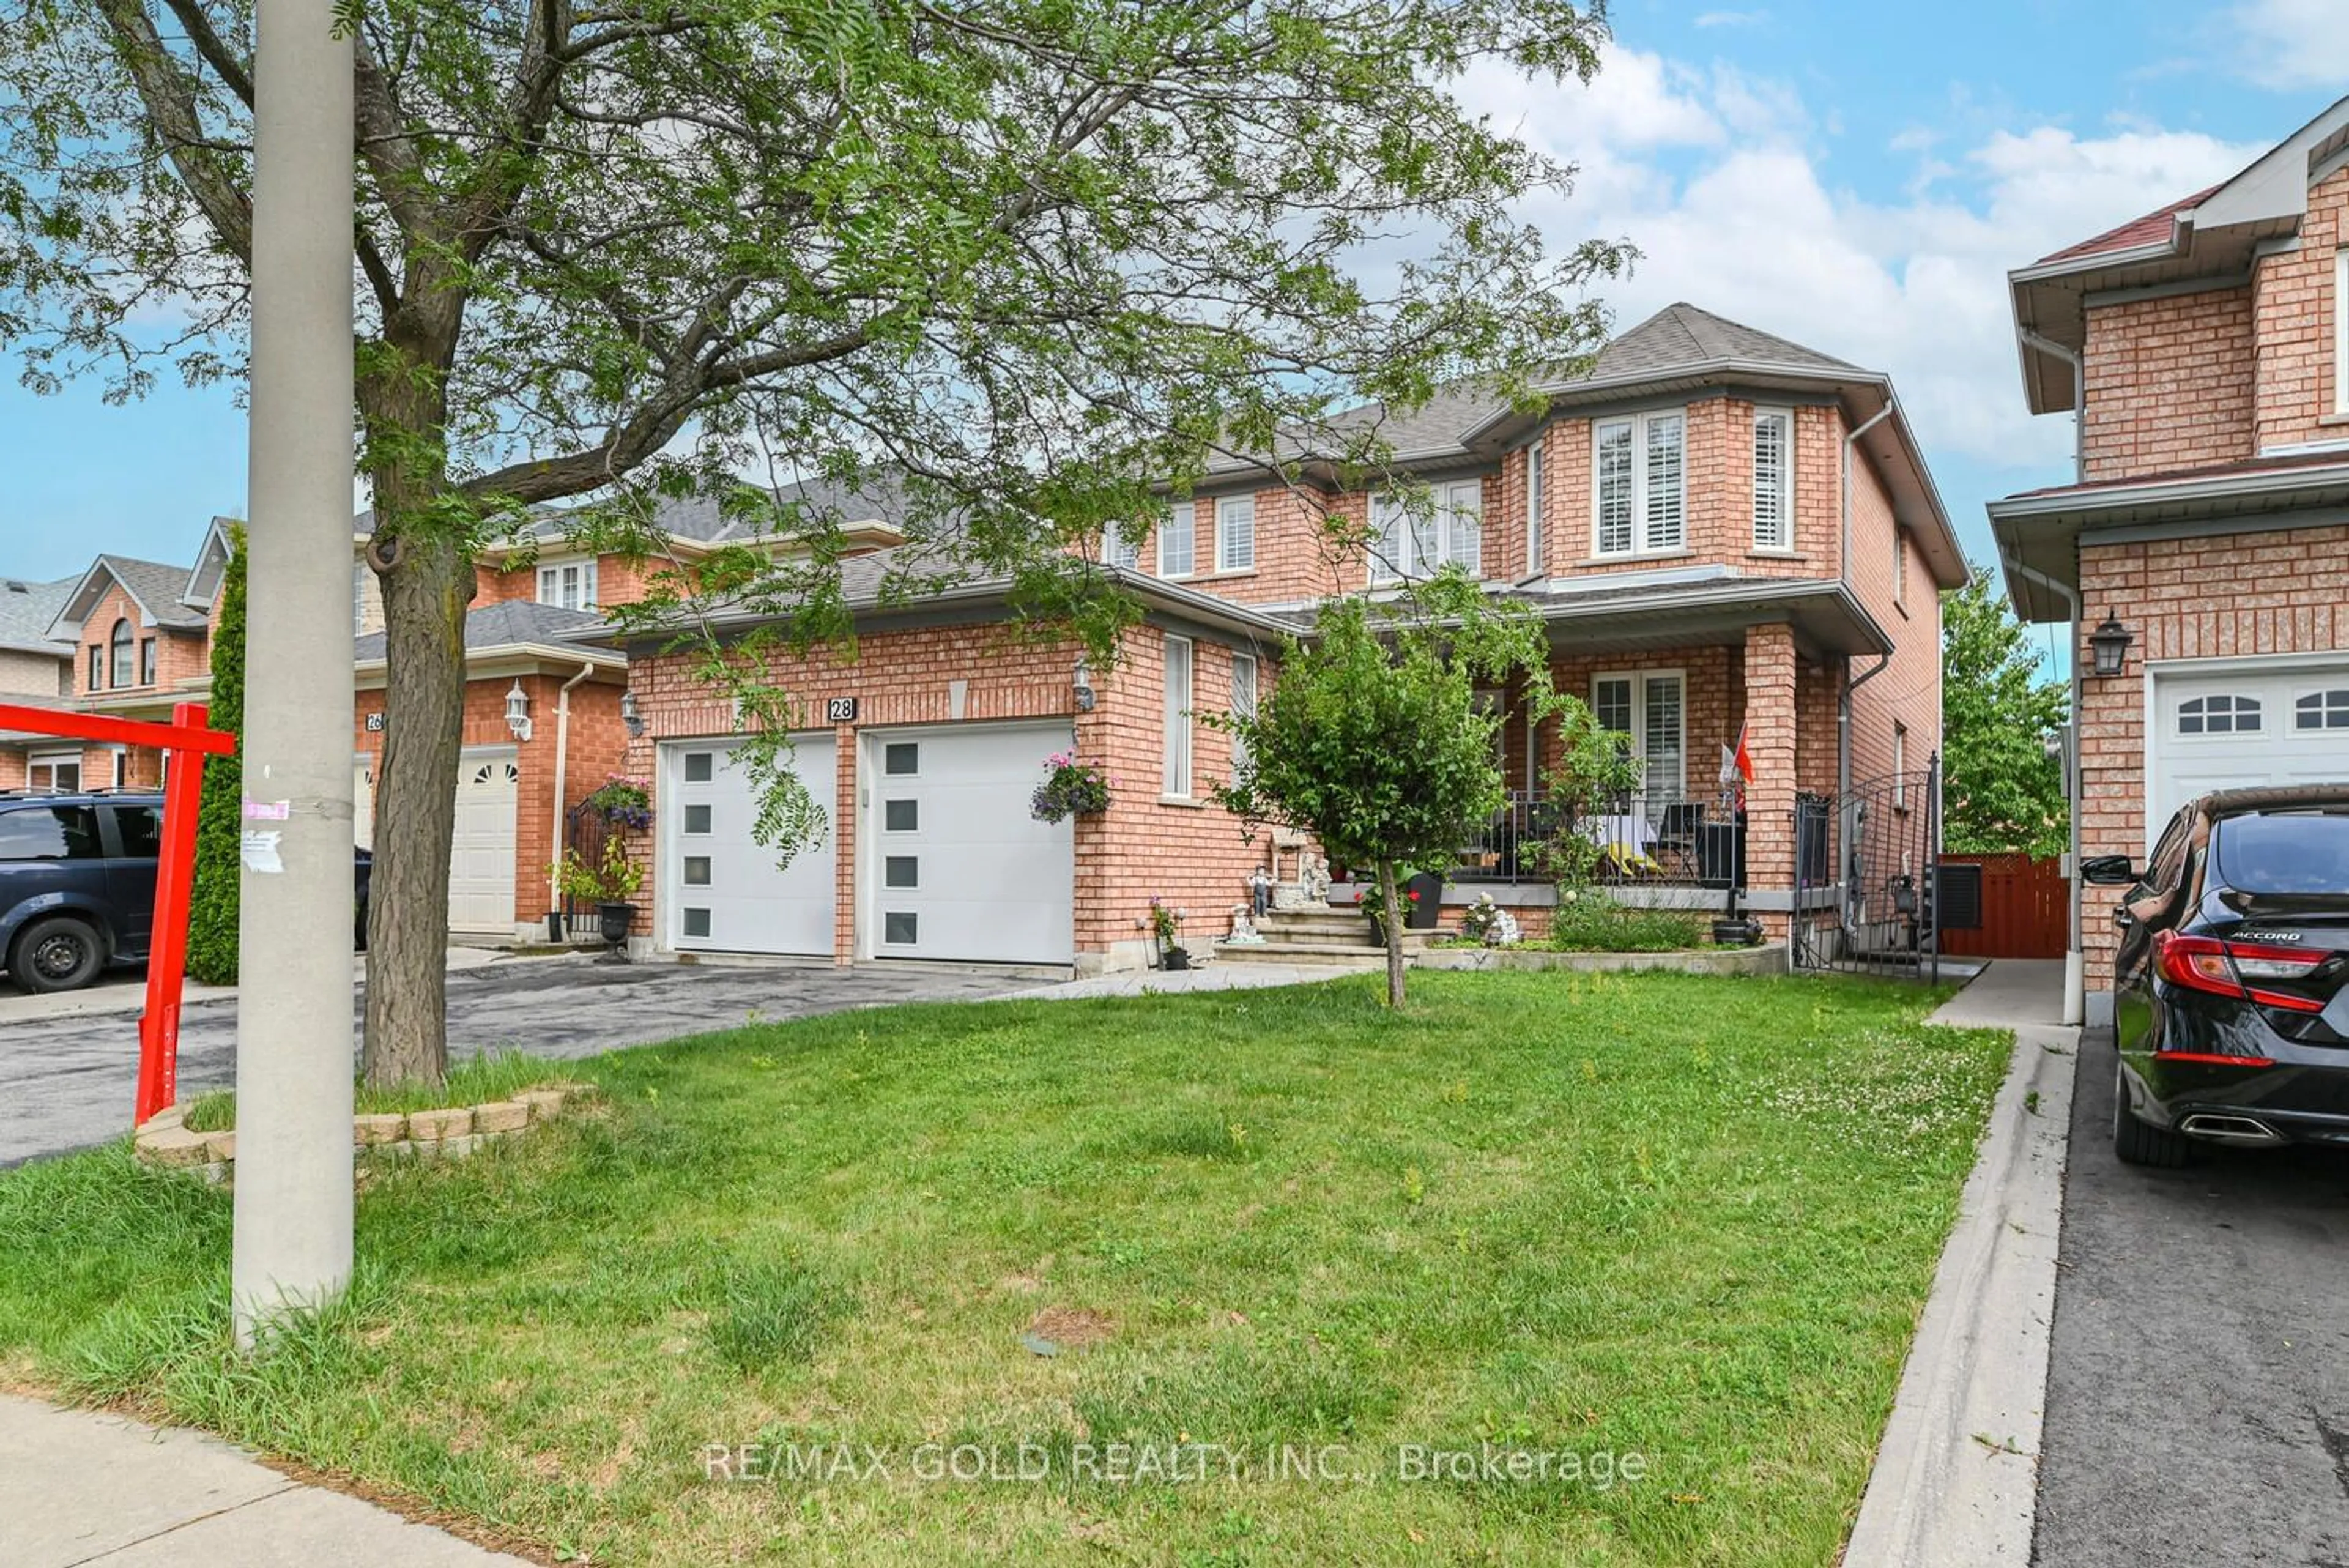 Home with brick exterior material for 28 Dragon Tree Cres, Brampton Ontario L6R 2P6